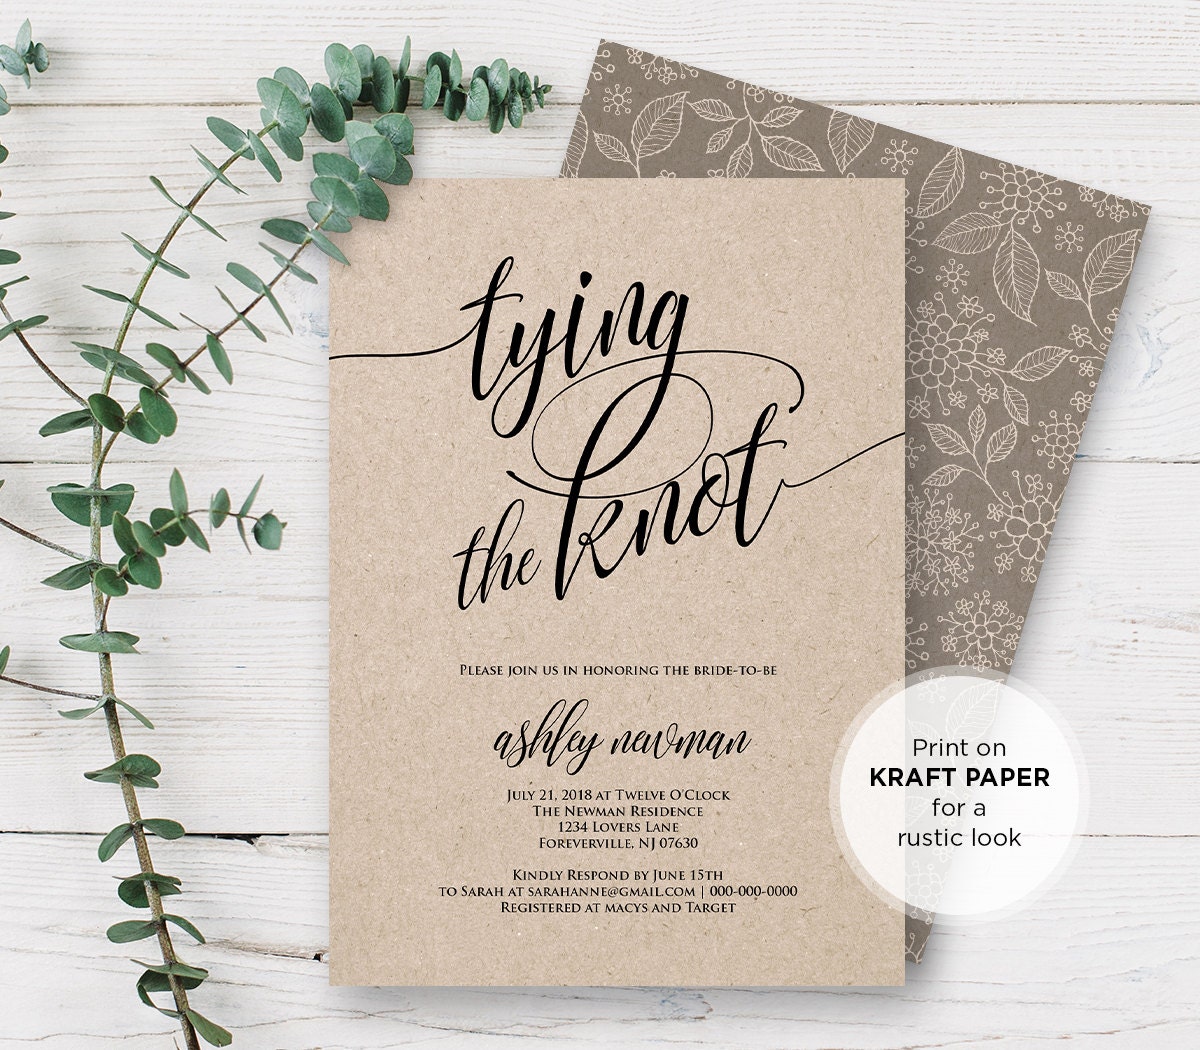 Rustic Bridal Shower Invitation Printable Tying The Knot Wedding Shower Invite Template